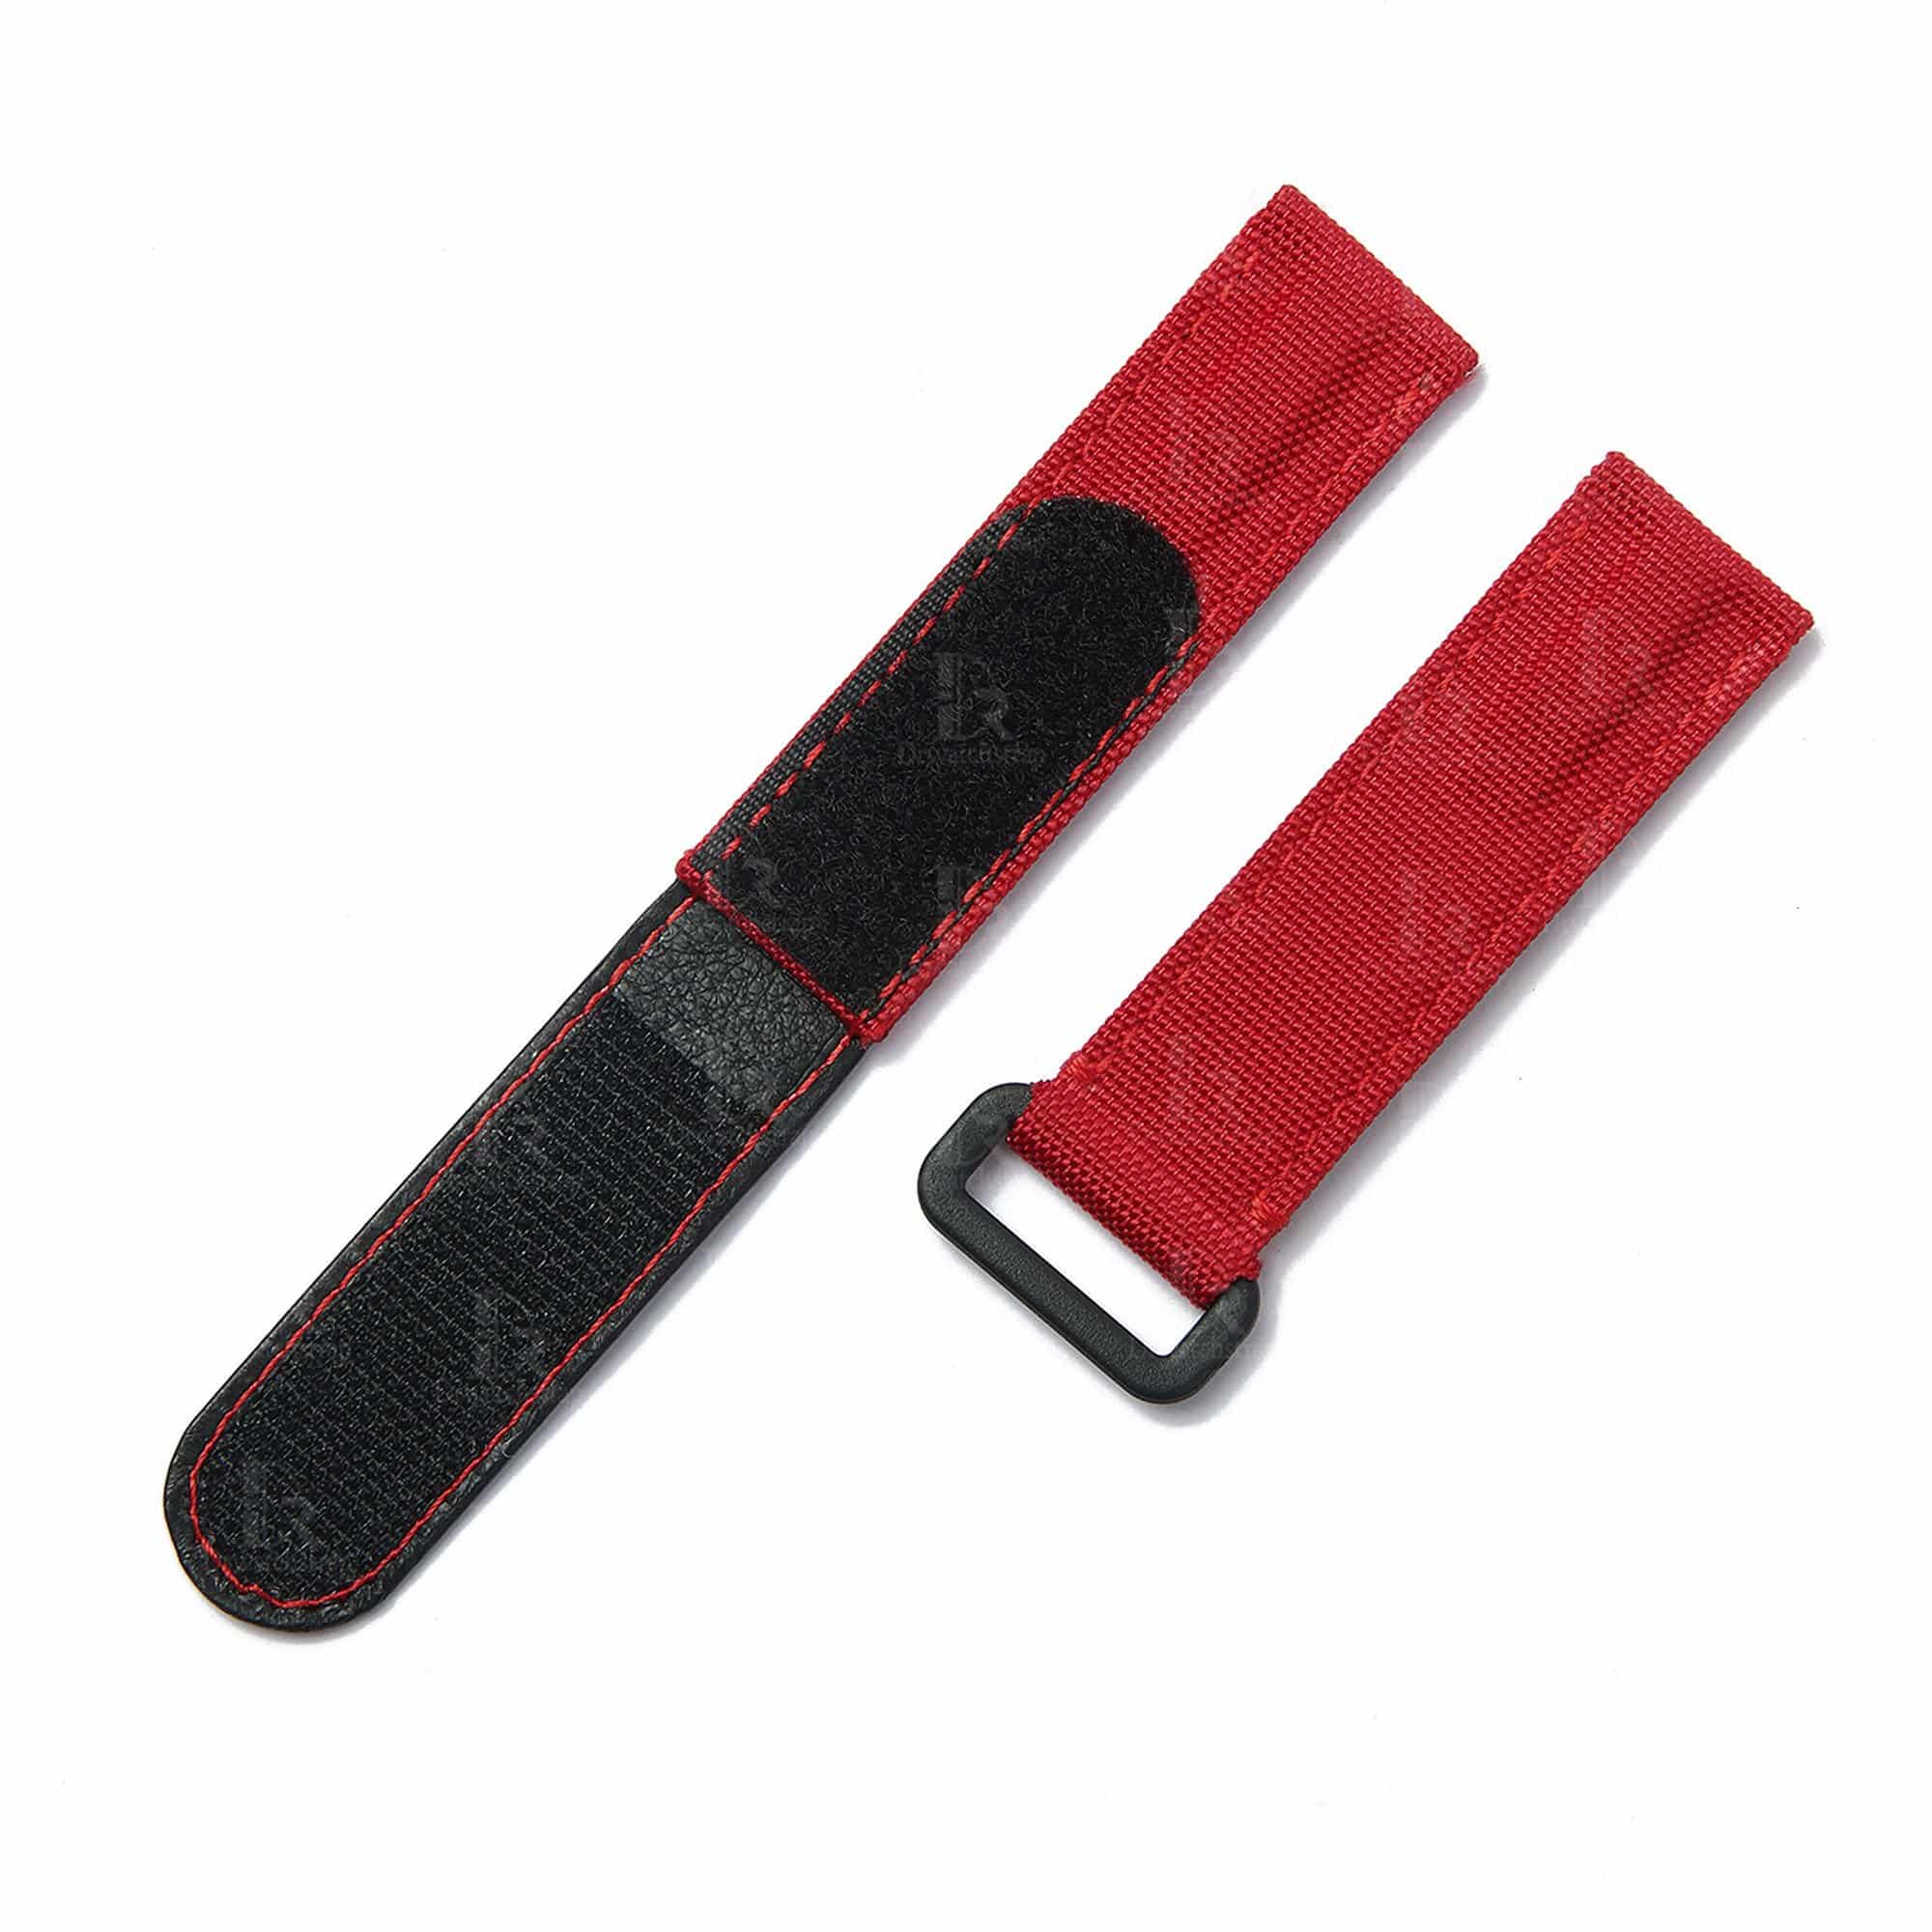 Rolex velcro high quality red nylon watch band